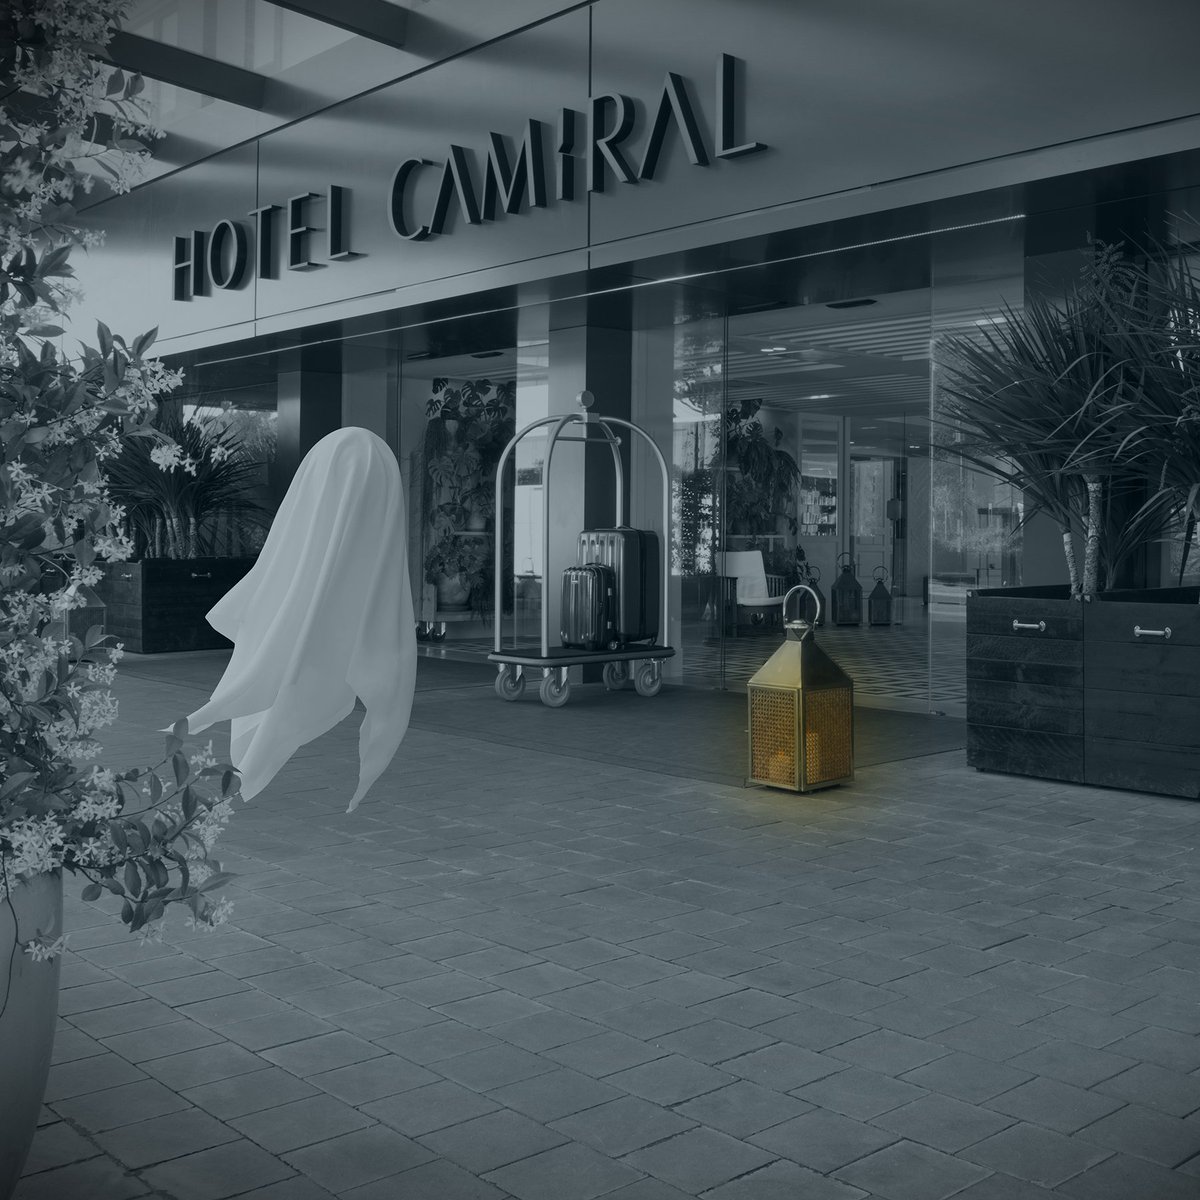 Halloween is here and we have all the tricks to enjoy it! 🎃 Join us in one of the many activities we have prepared for everyone. Discover them all here: bit.ly/PGAHalloween20… #HotelCamiral